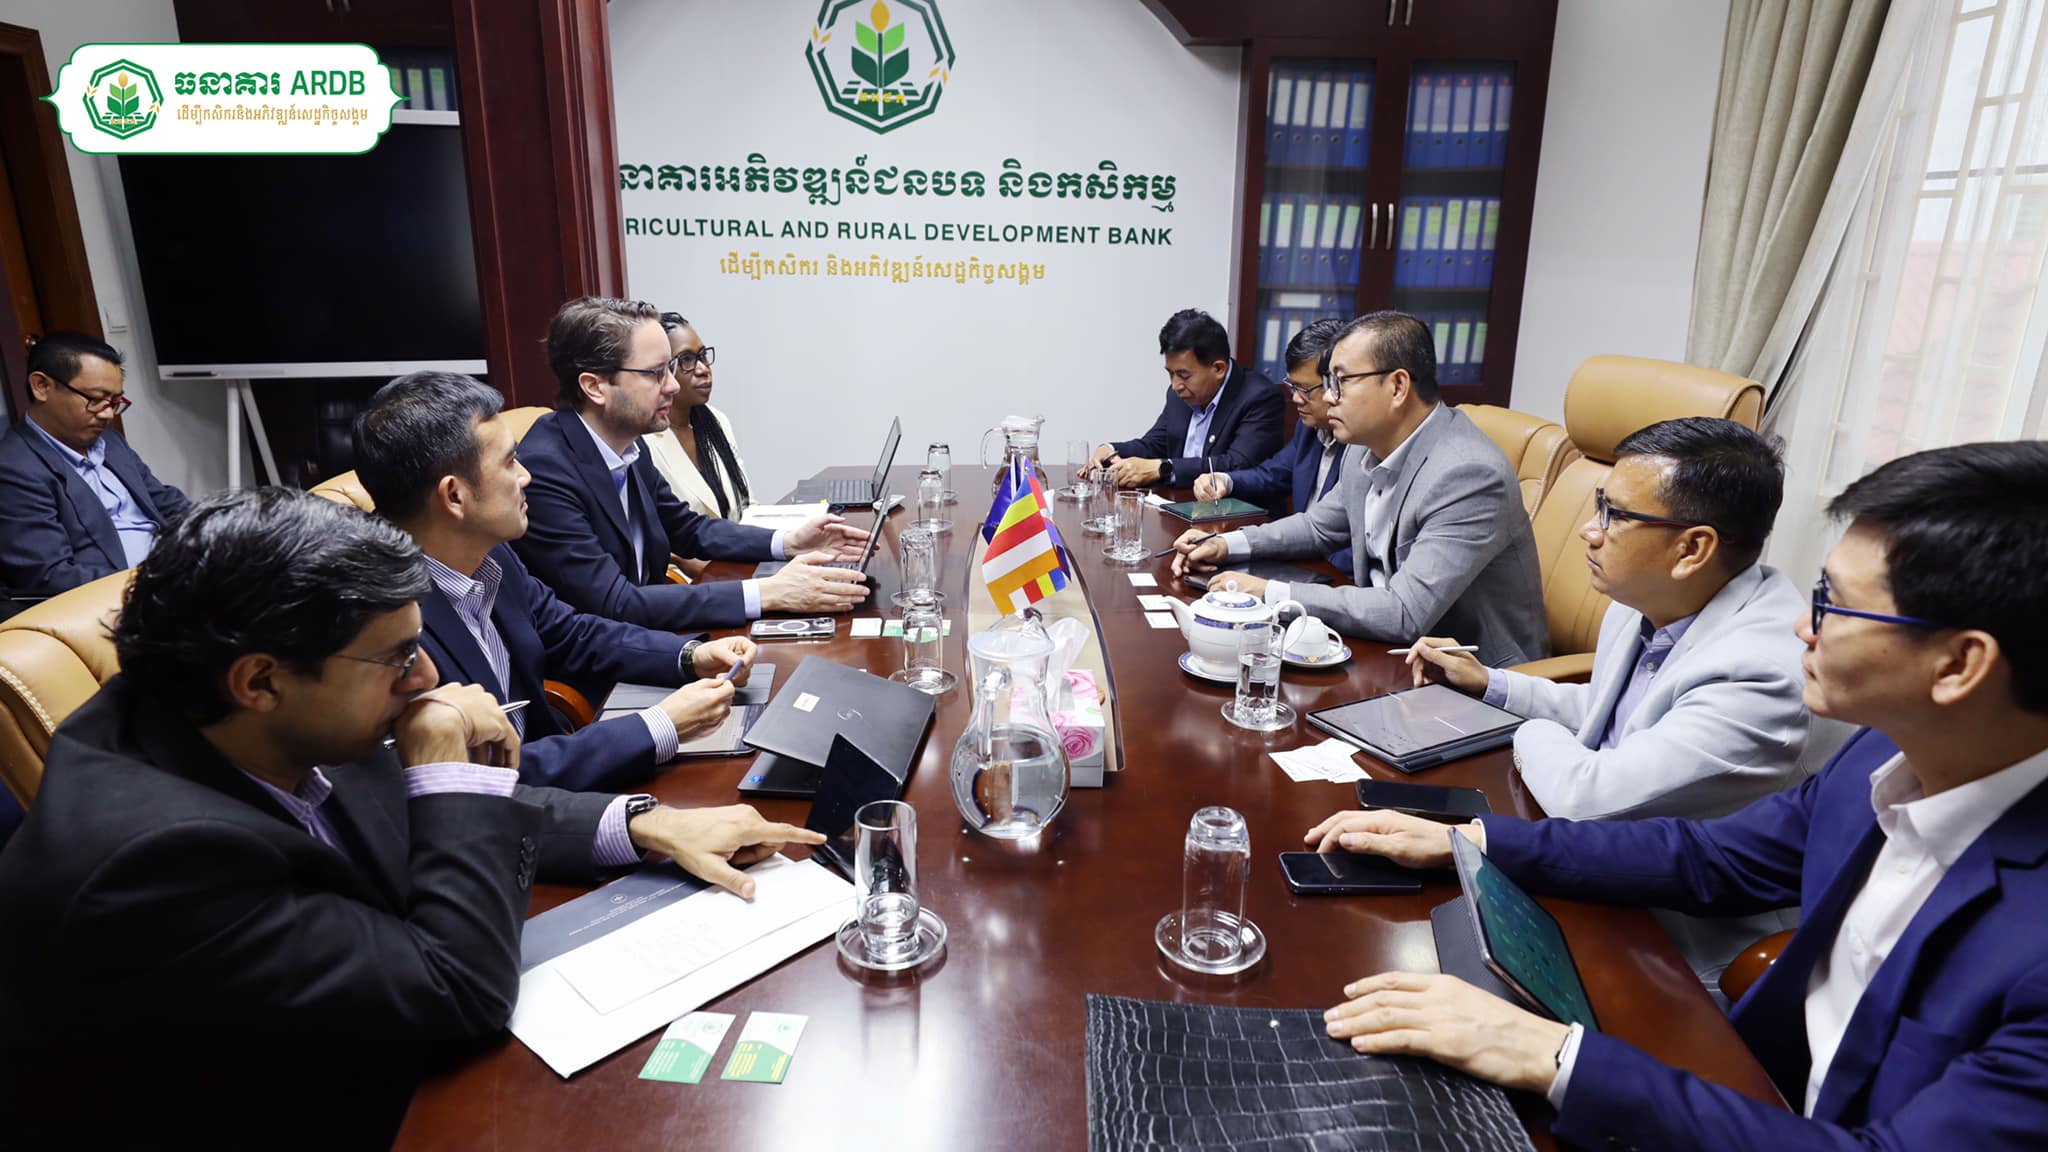 H.E. Dr. KAO THACH accompanied by H.E. Deputy CEO and colleagues, has met World Bank Representatives